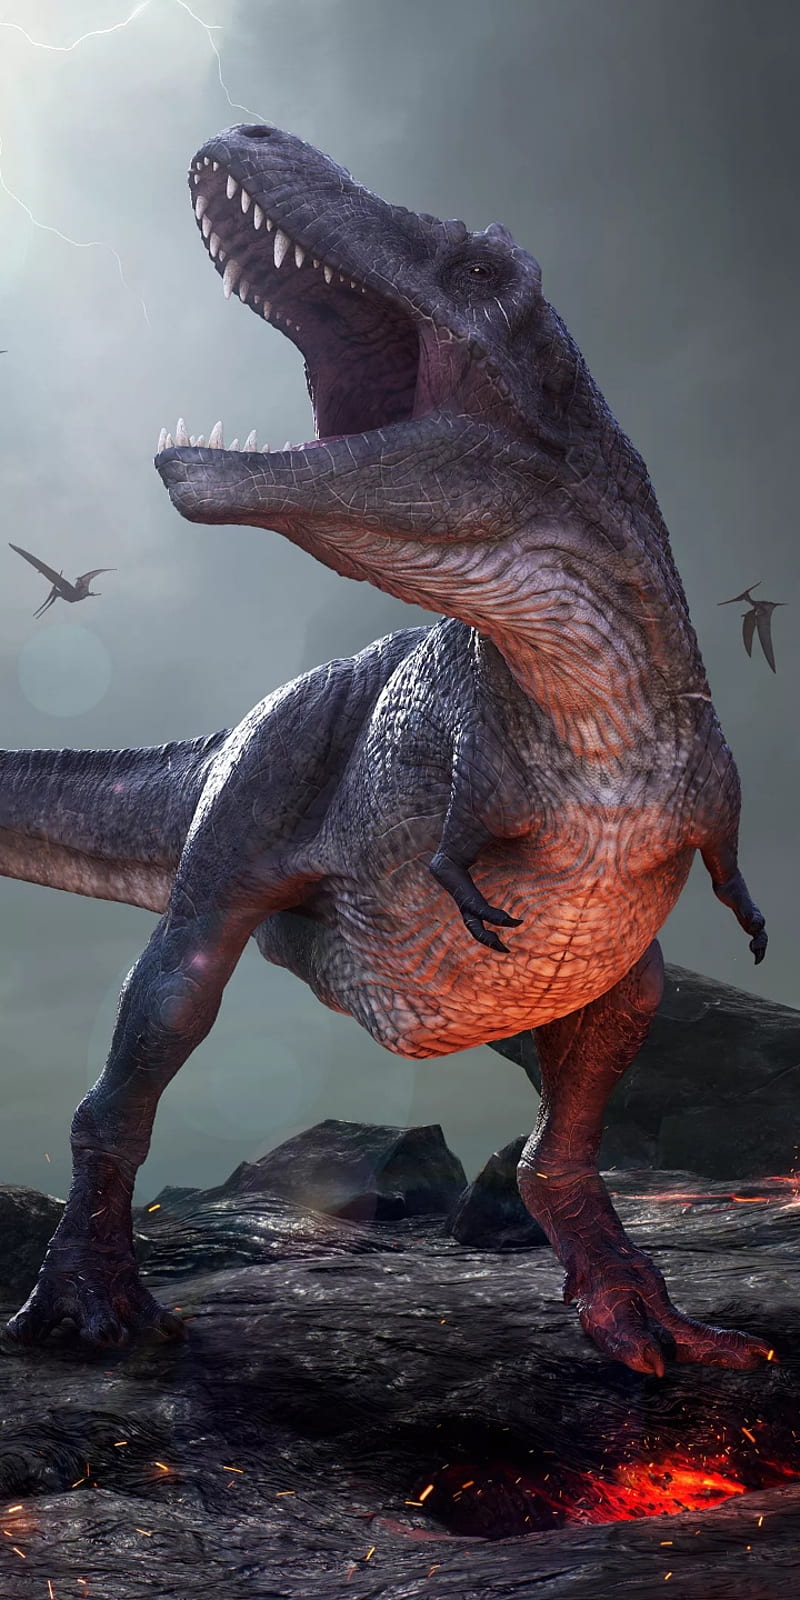 I am an anime fan but... (Btw I just think this t rex photo looks very  cool.) : r/Dinosaurs